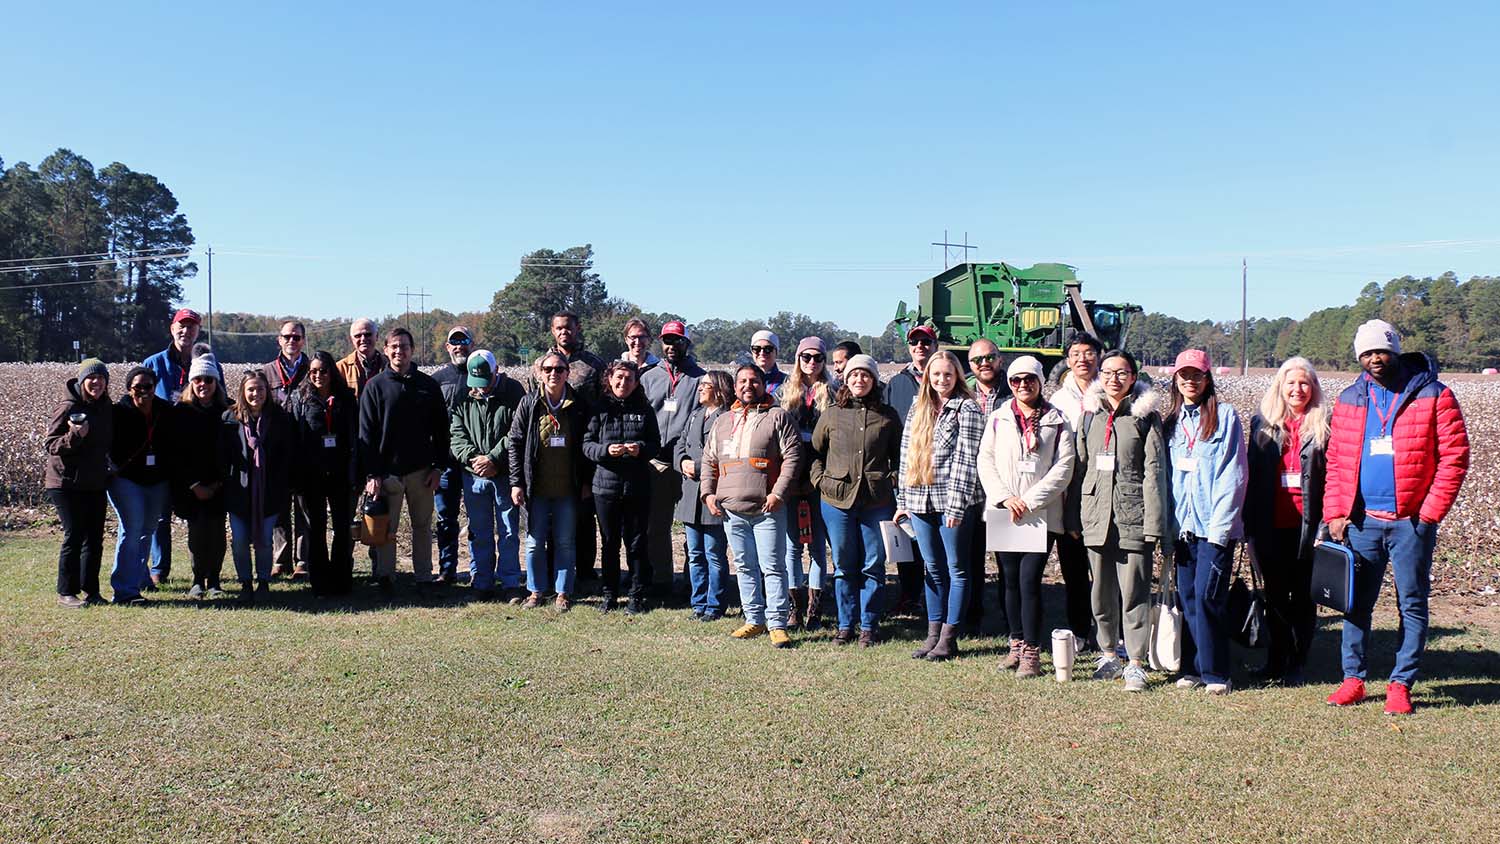 N.C. PSI plant sciences initiative graduate students research learn from farmers and NC State Extension